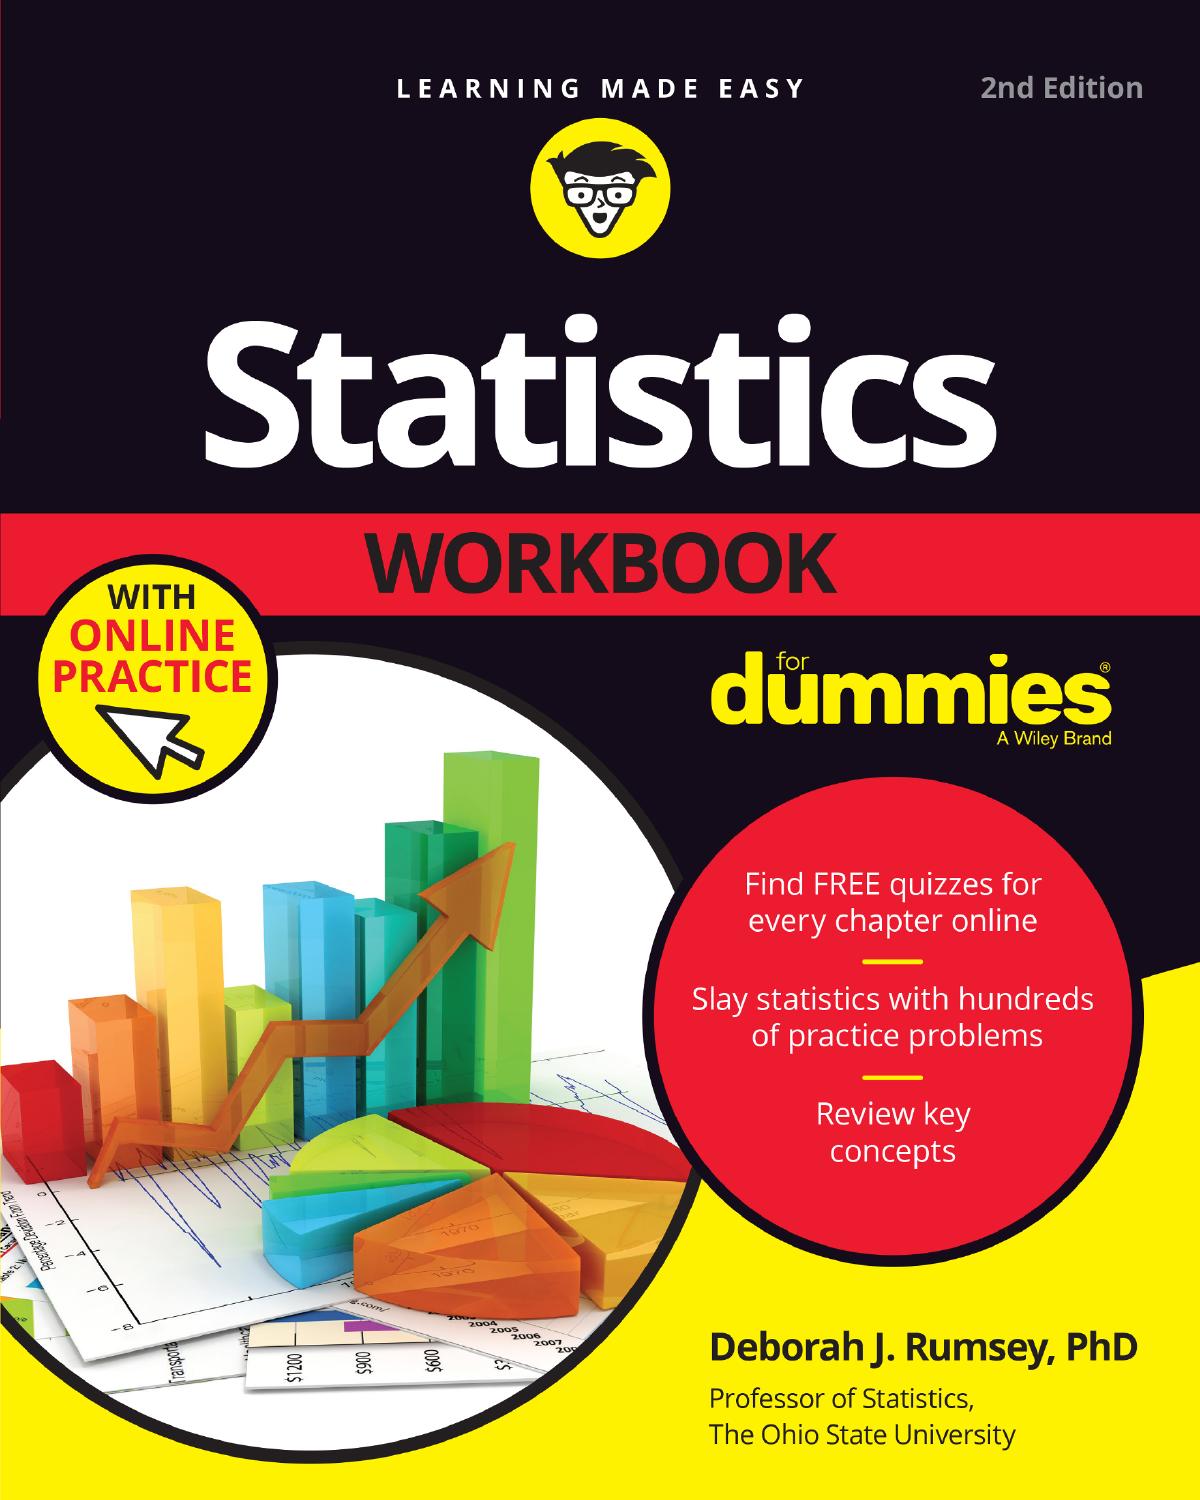 bookkeeping for dummies pdf free download